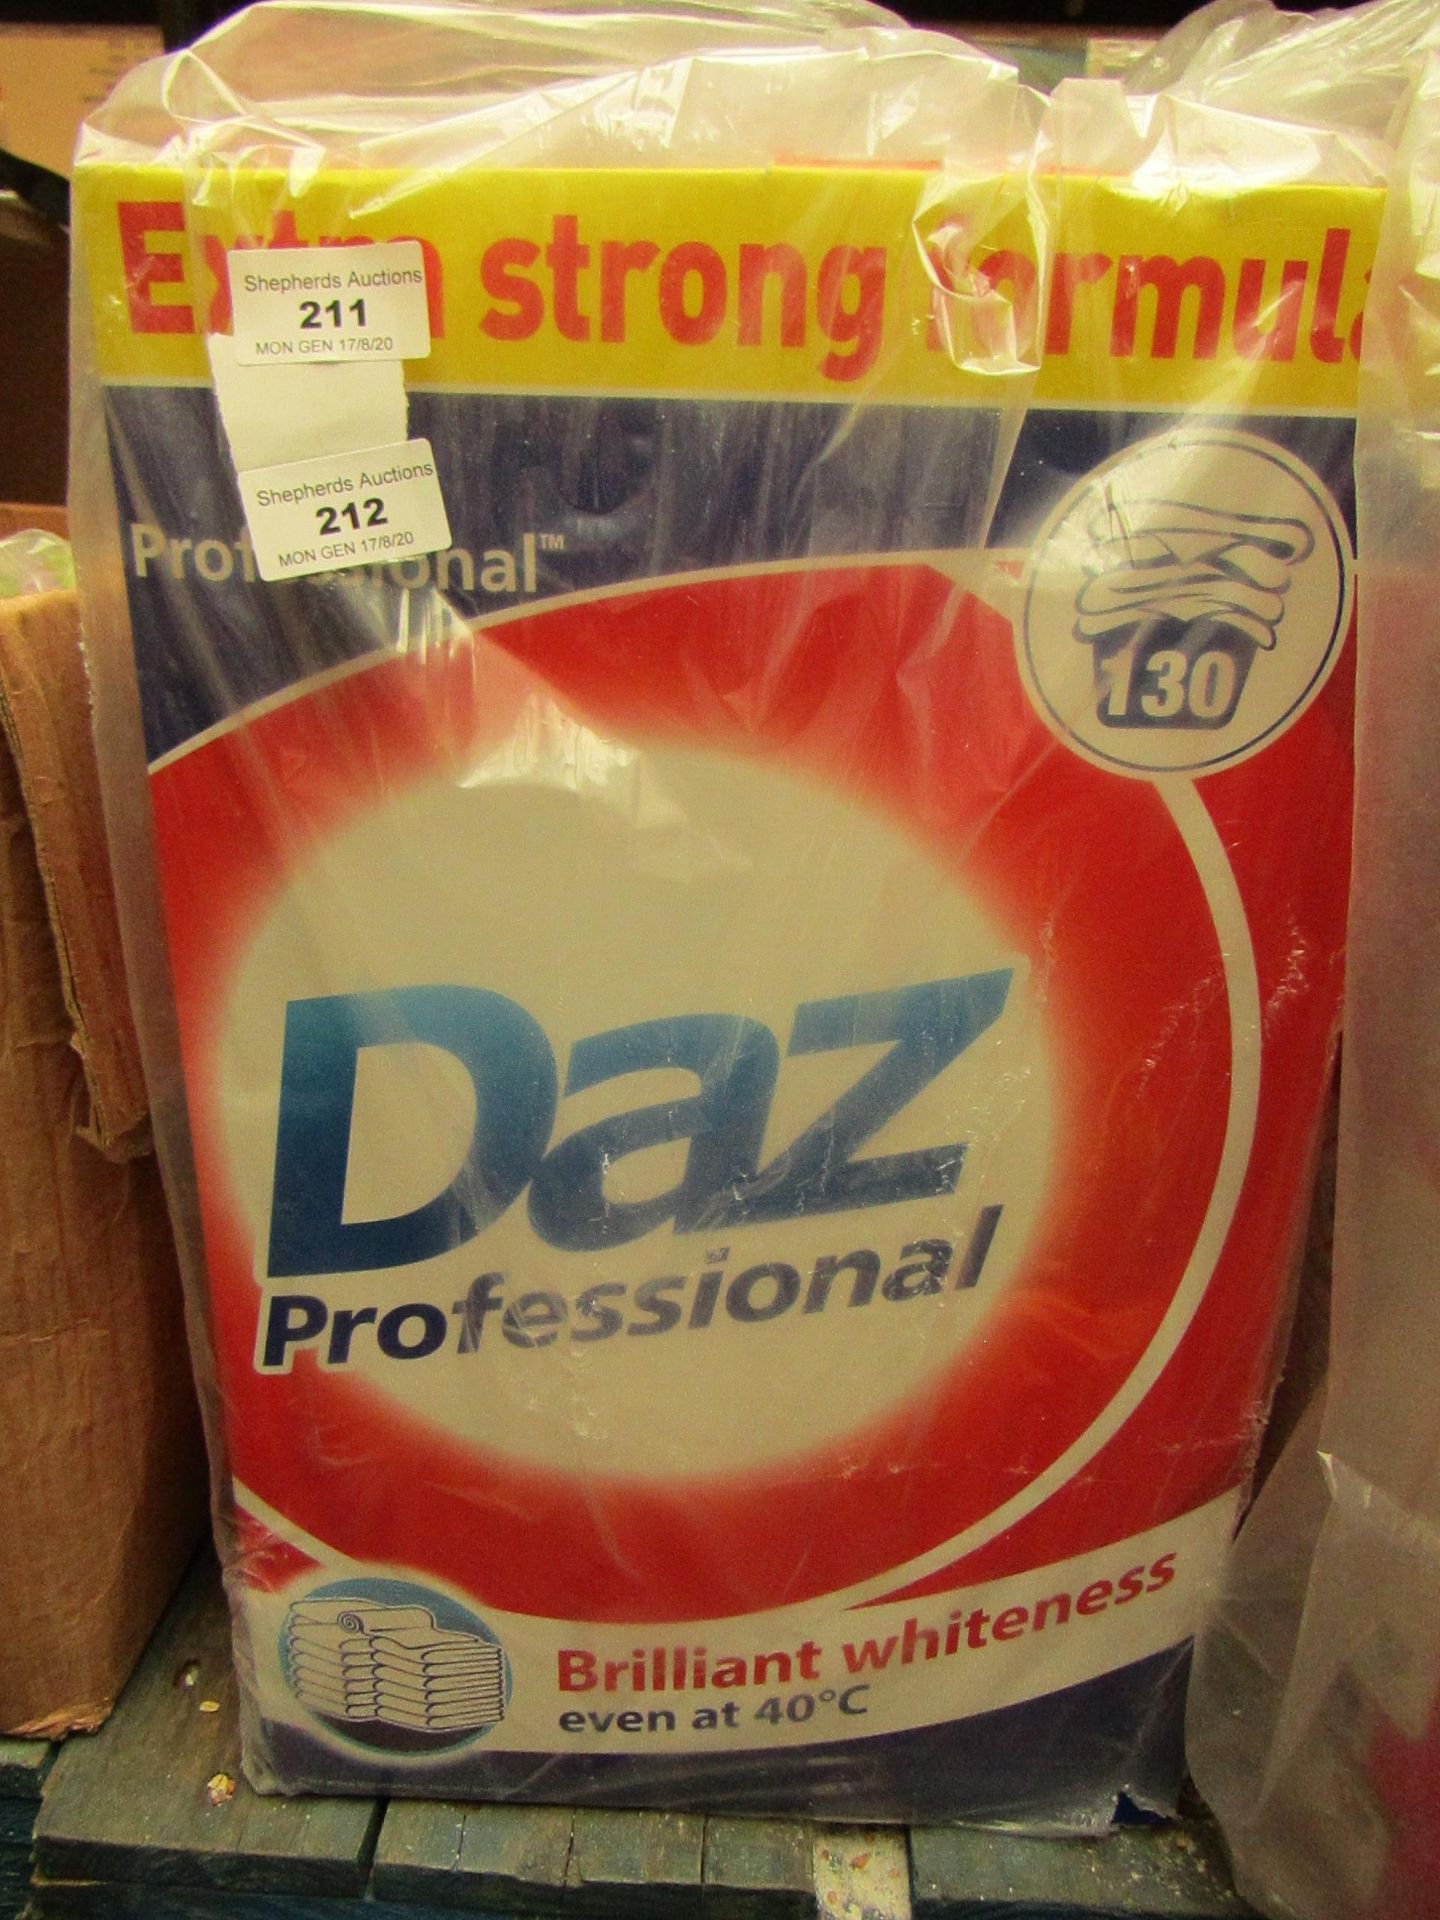 Daz Proffessional 130 washes Washing Powder. Box has split but has been repaired.